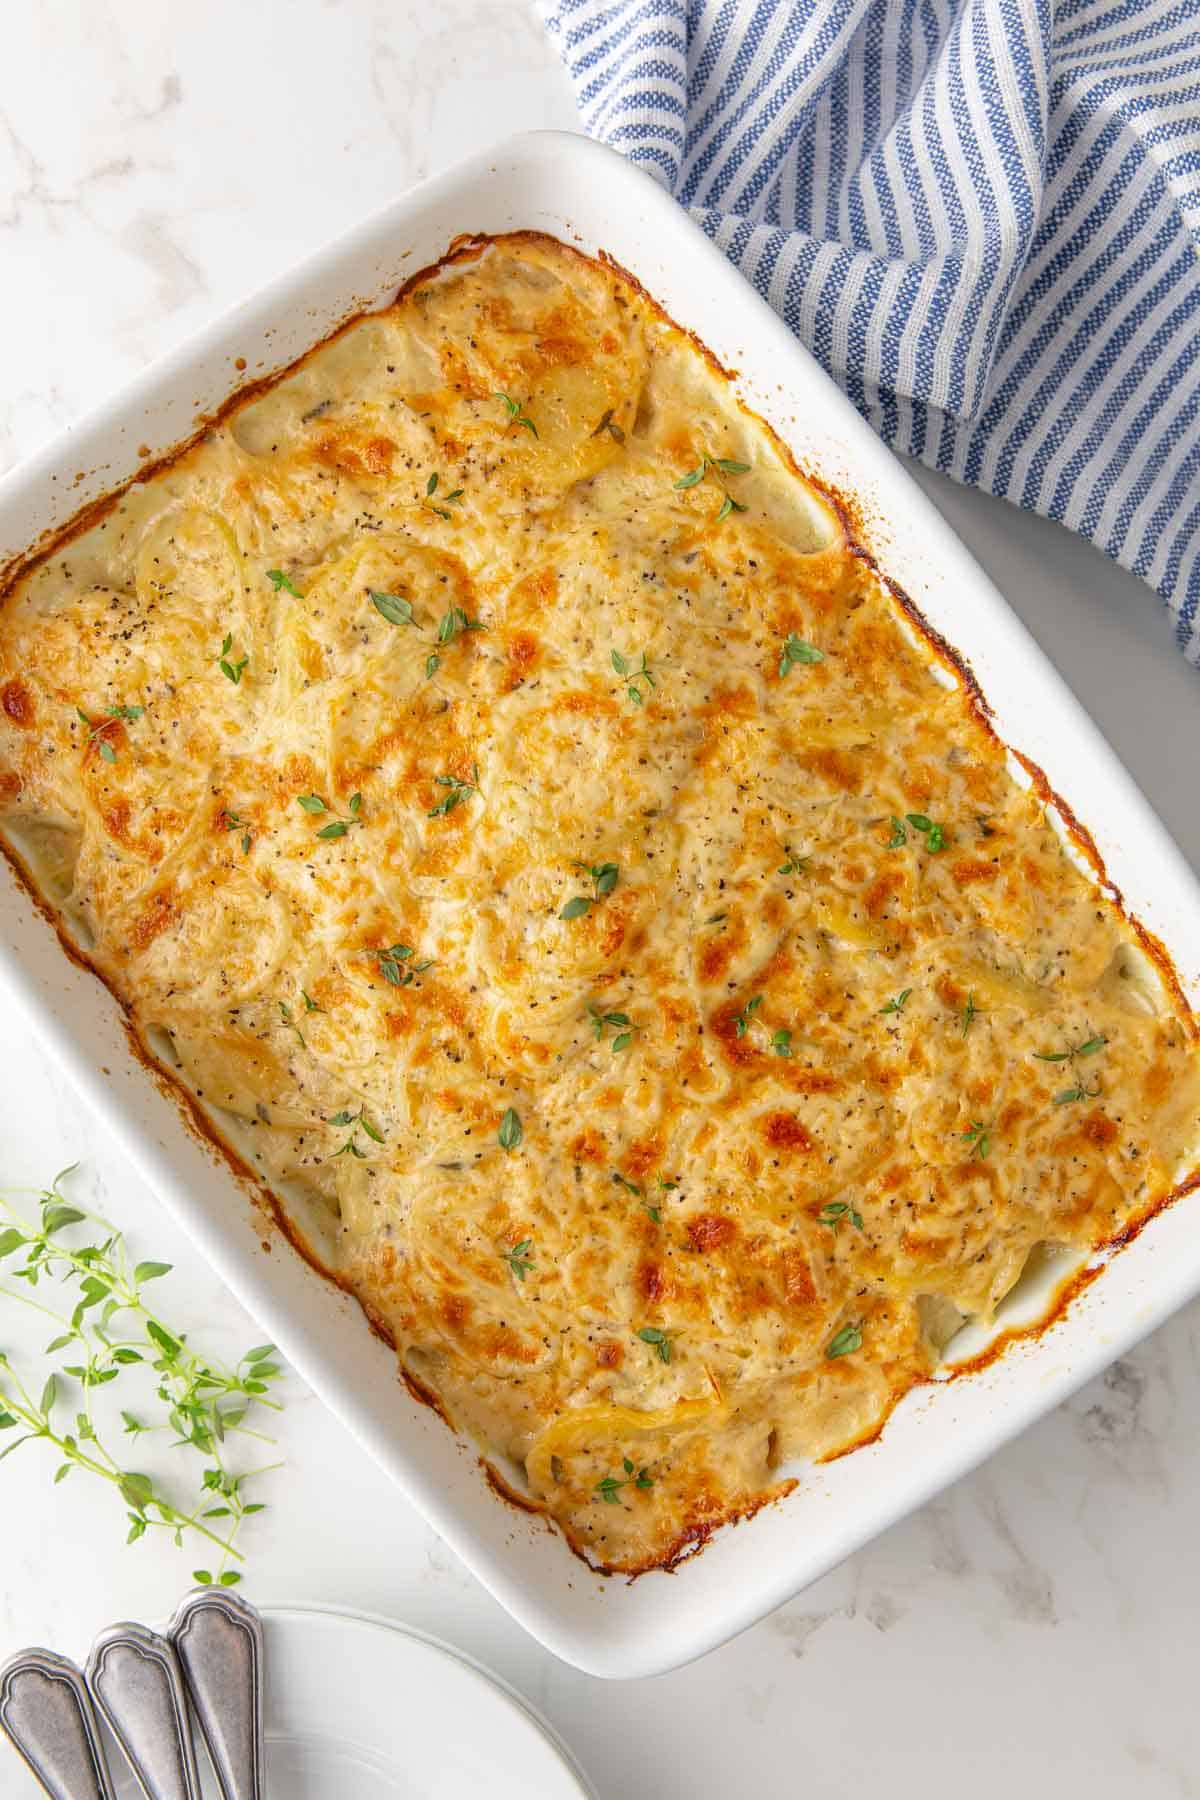 Overhead view of baked scalloped potatoes in a white baking dish.